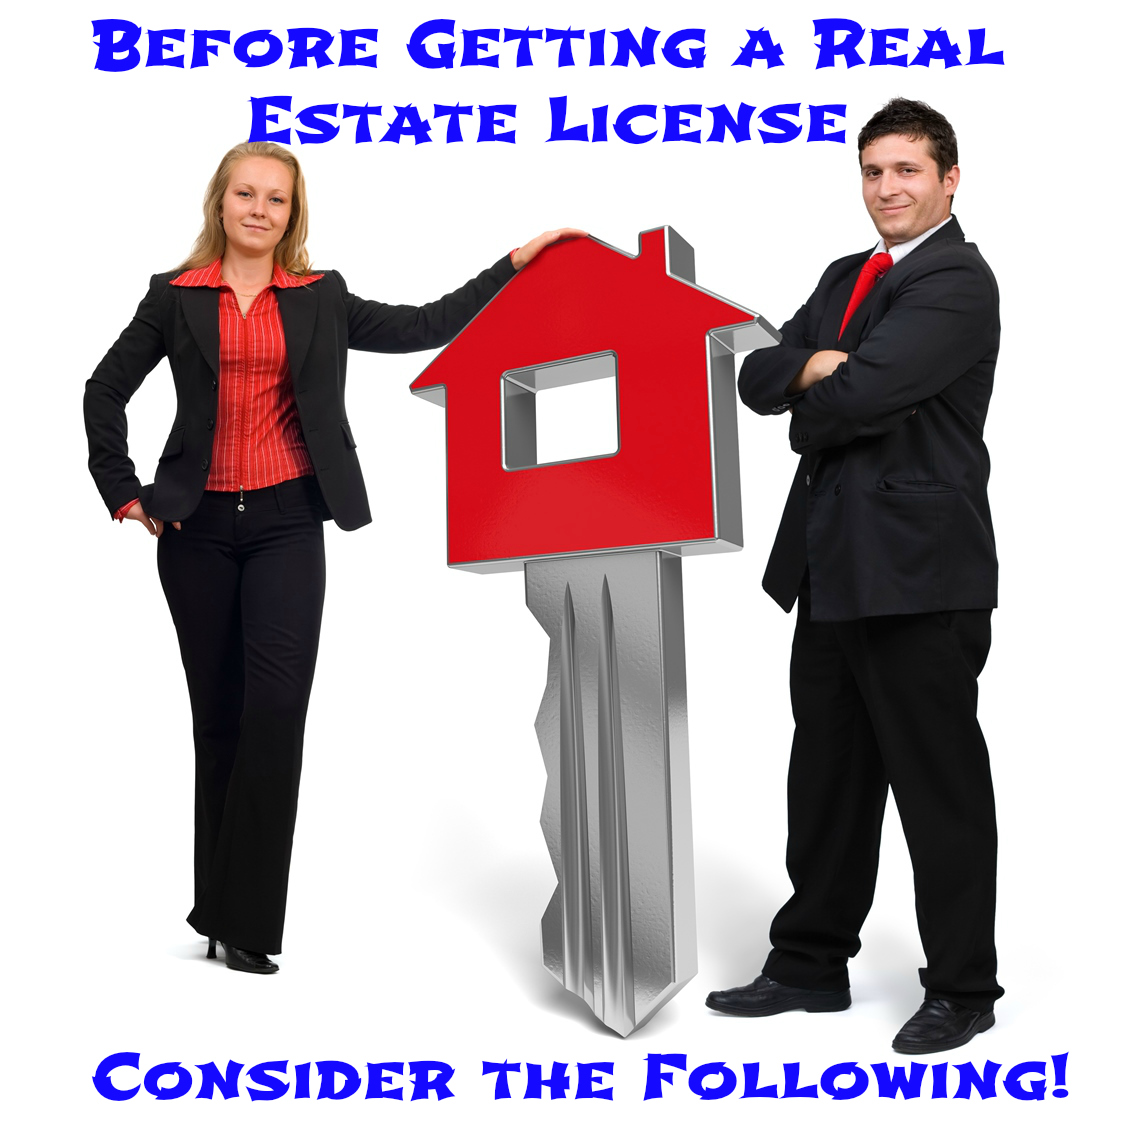 Before Getting a Real Estate License, Consider the Following!